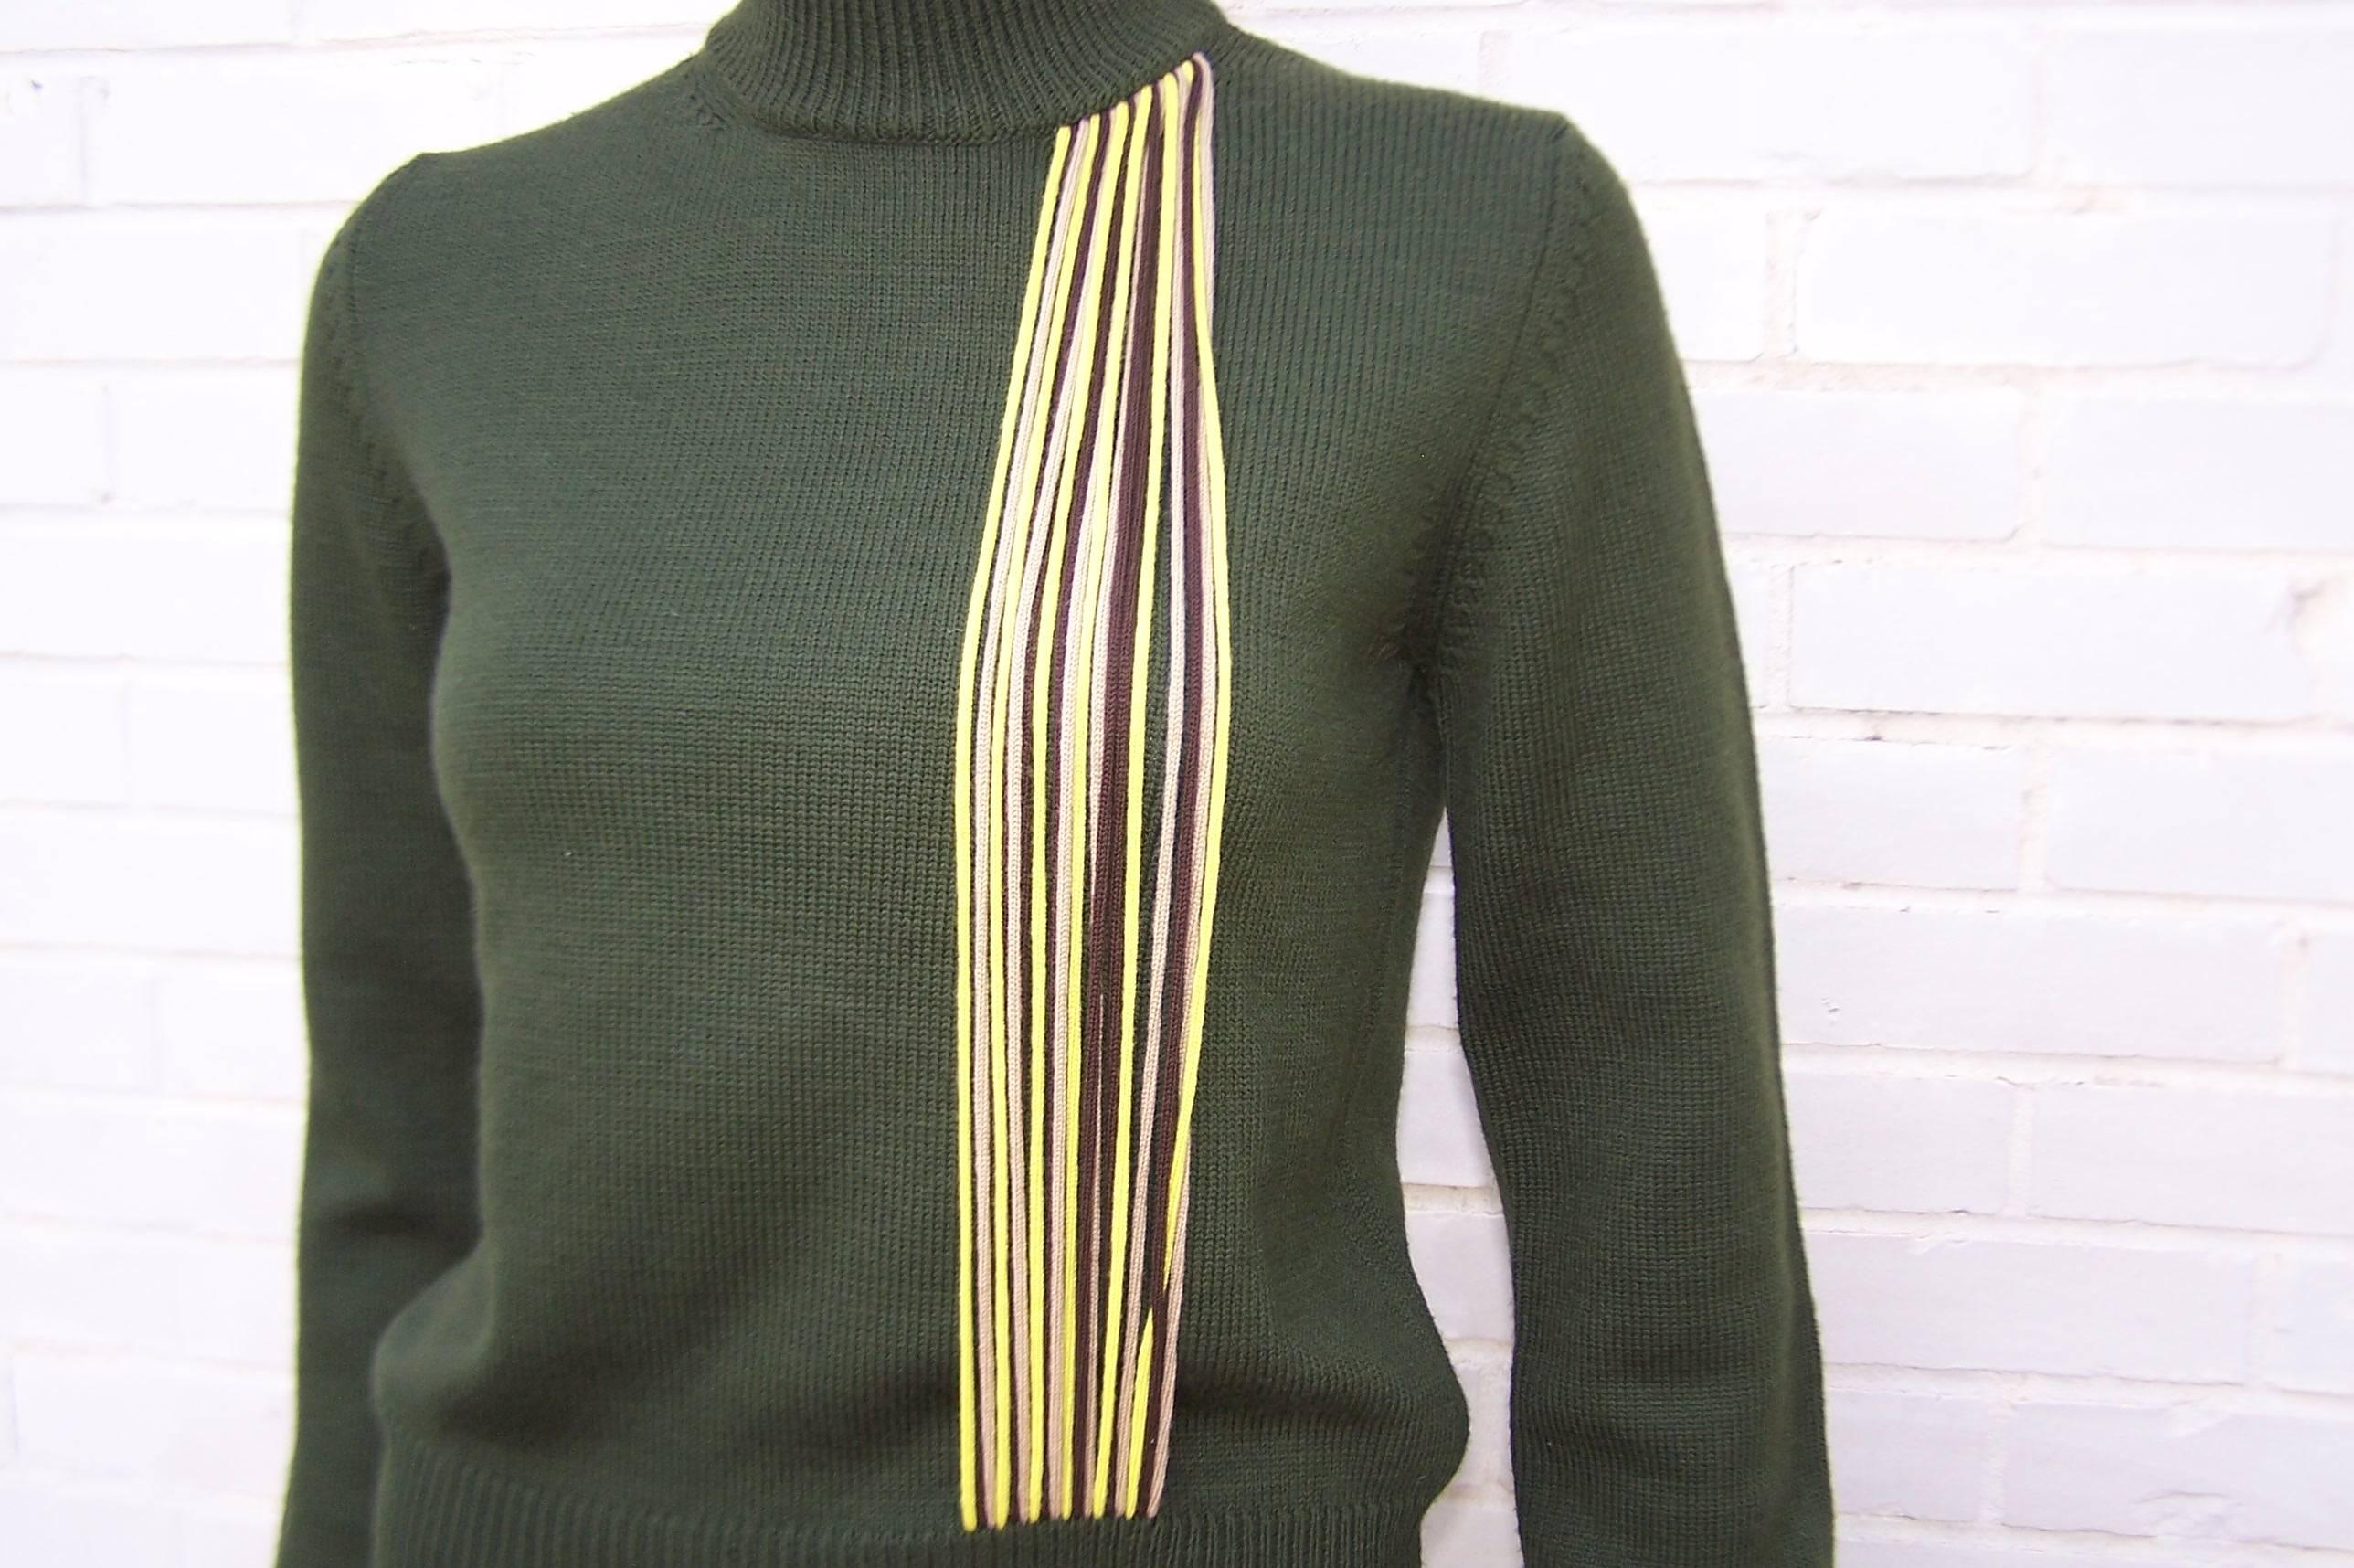 C.1990 Byblos Army Green Turtleneck Sweater With Op Art Yarn Details 2